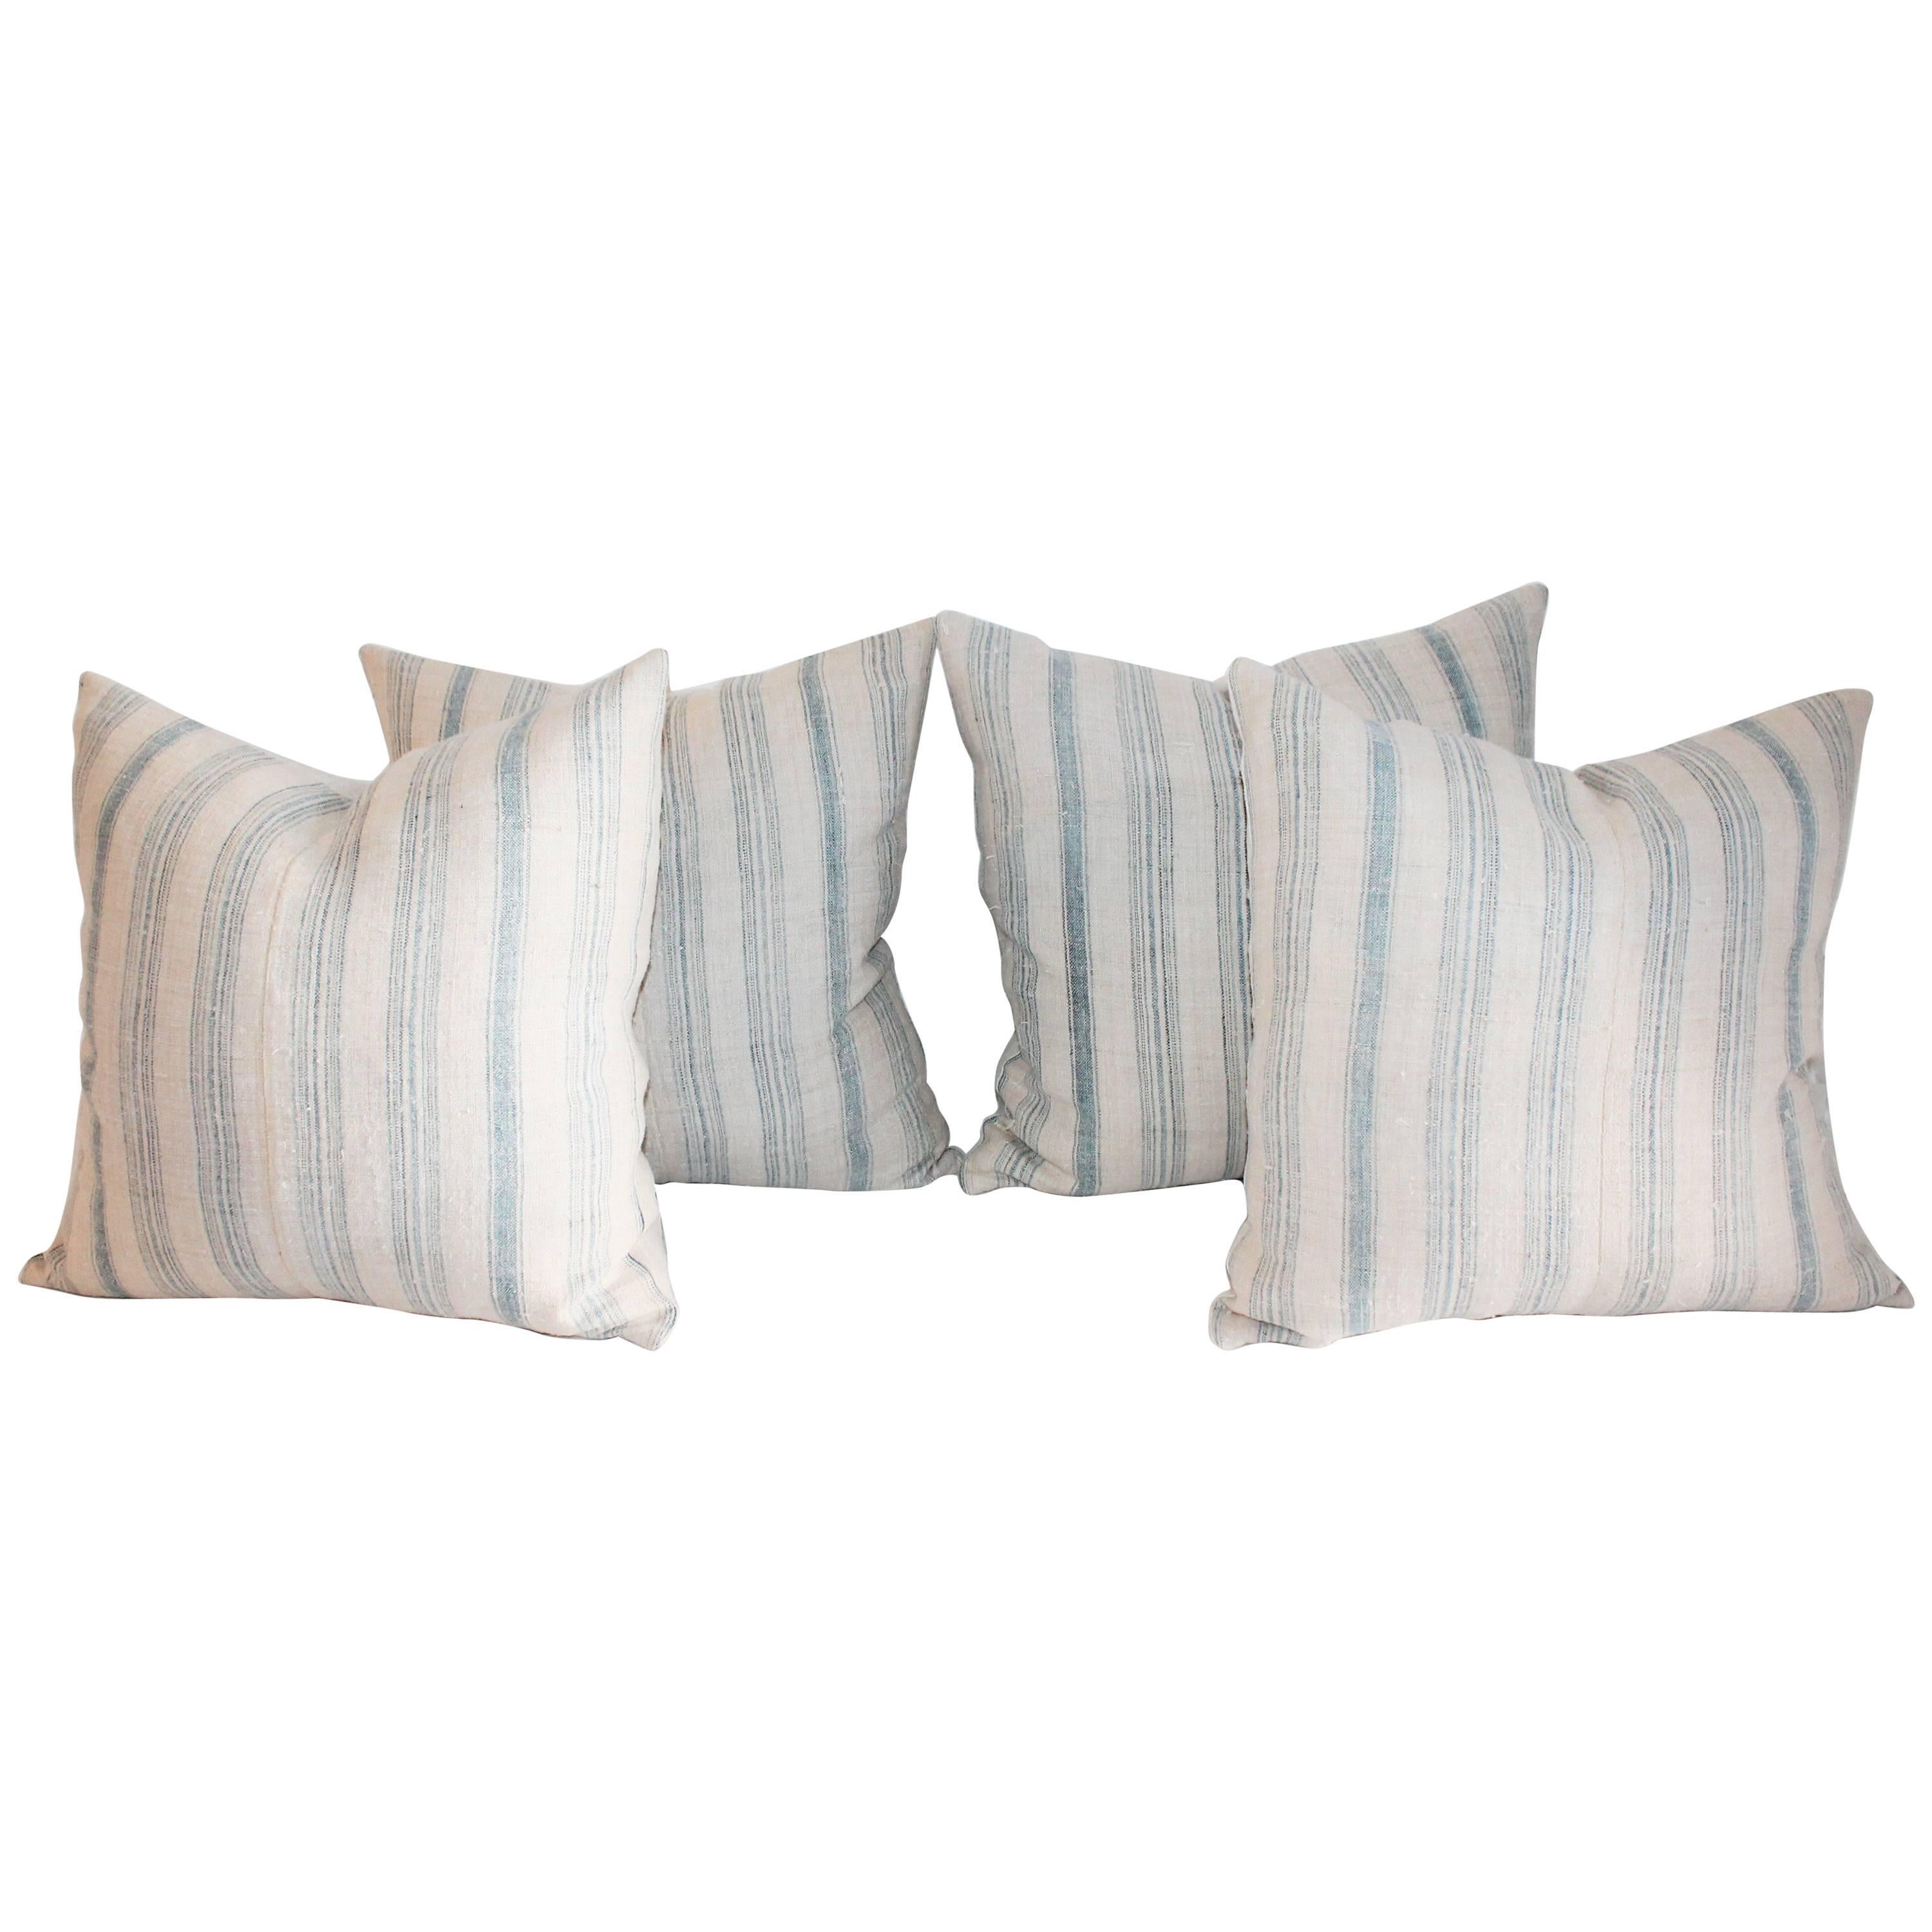 Two Pairs of Striped 19th Century Linen Ticking Pillows